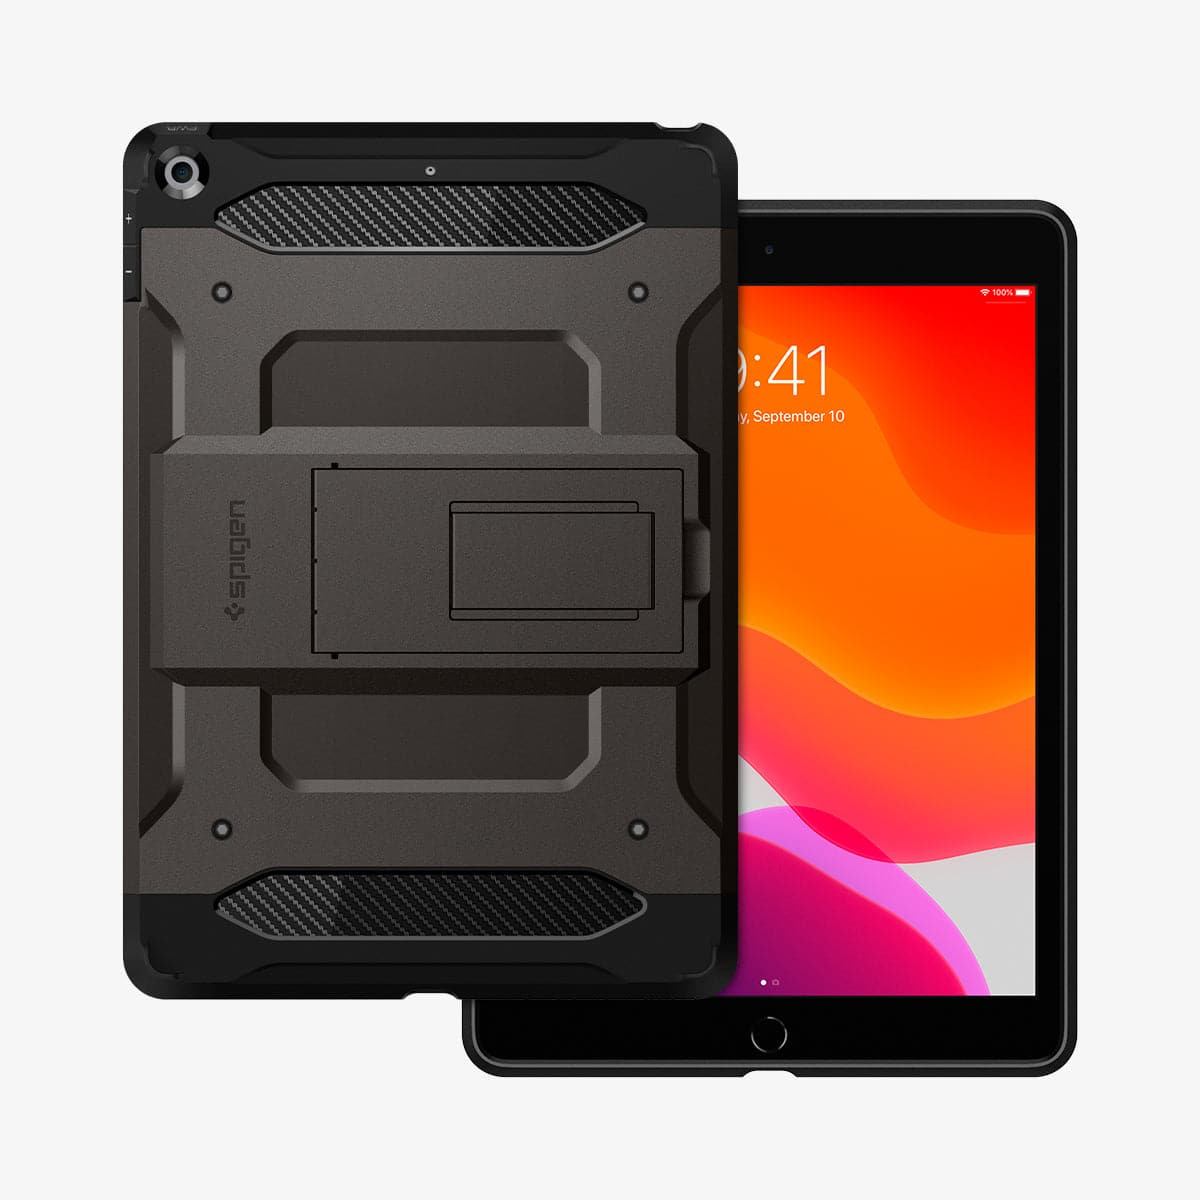 ACS00378 - iPad 10.2" Case Tough Armor Tech in gunmetal showing the back and front